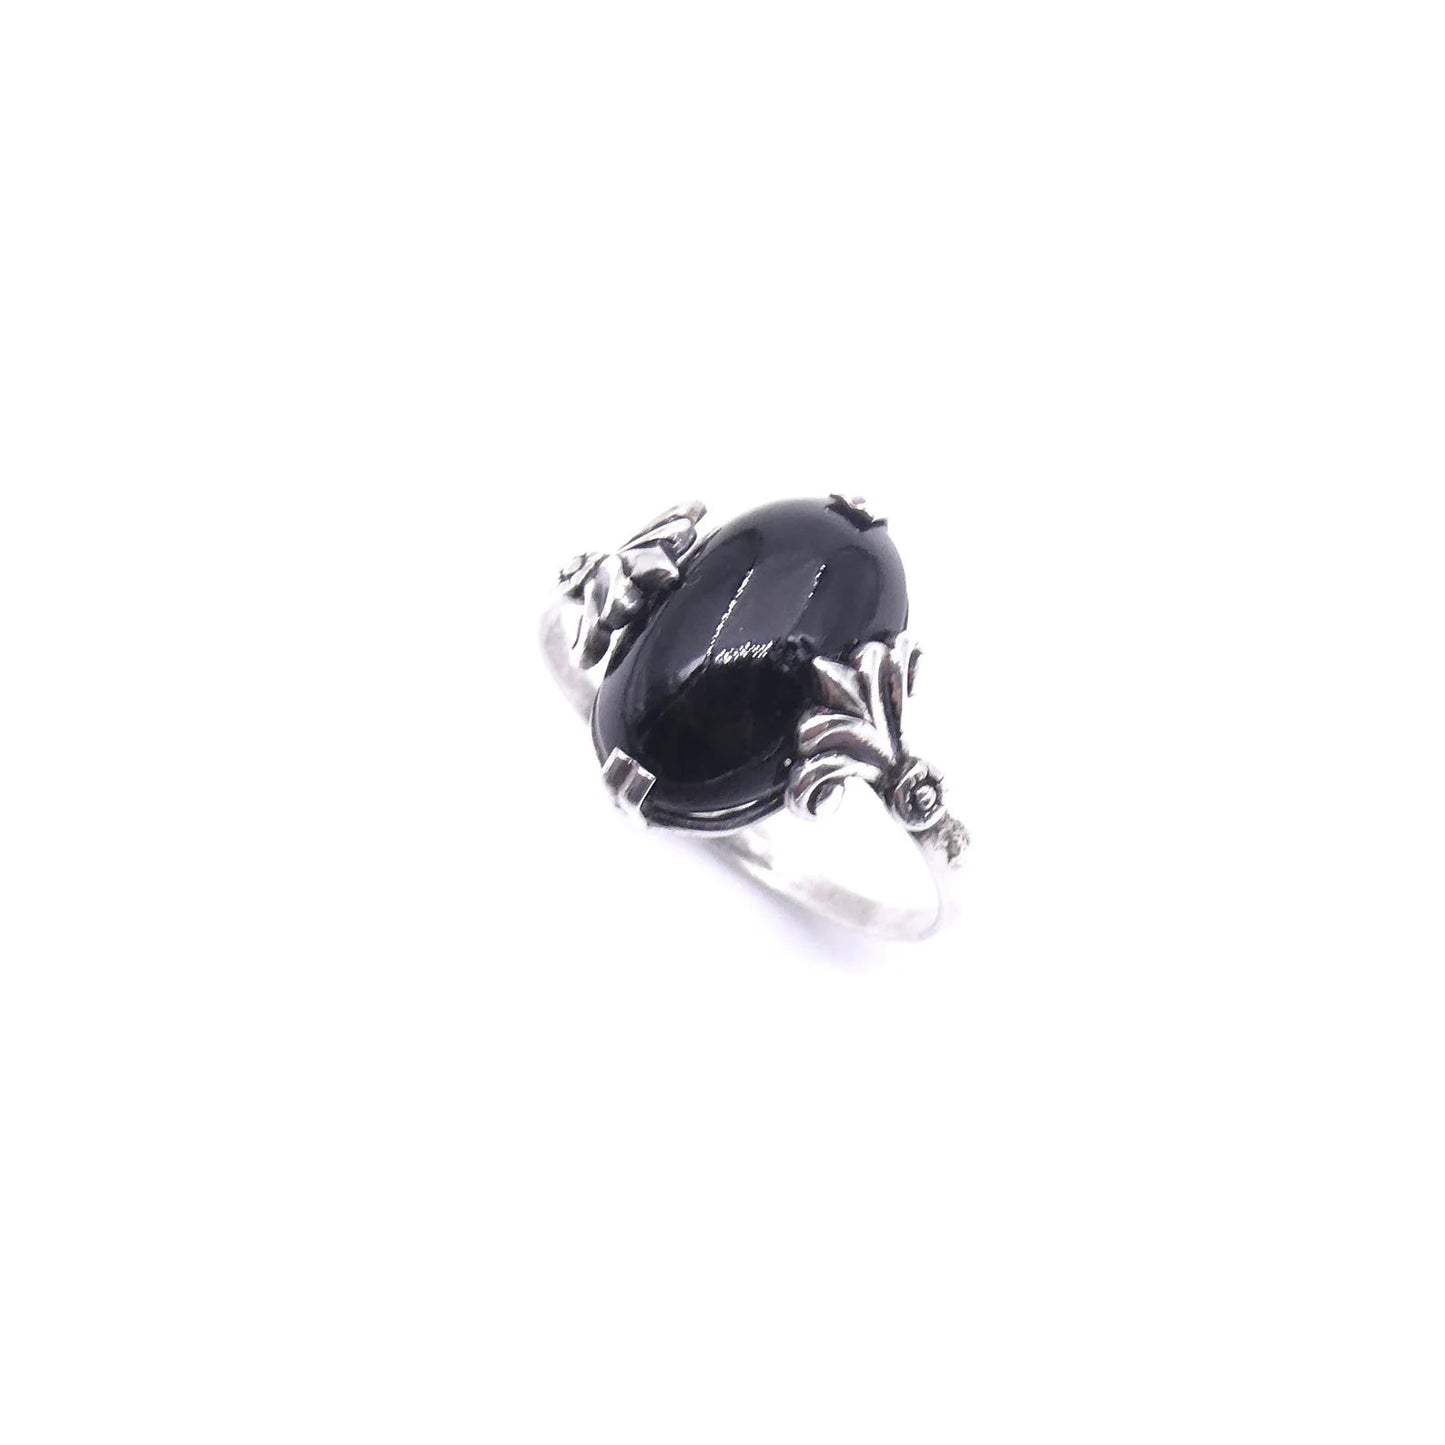 Antique style onyx and silver ring, with a scrolled silver setting. - Collected